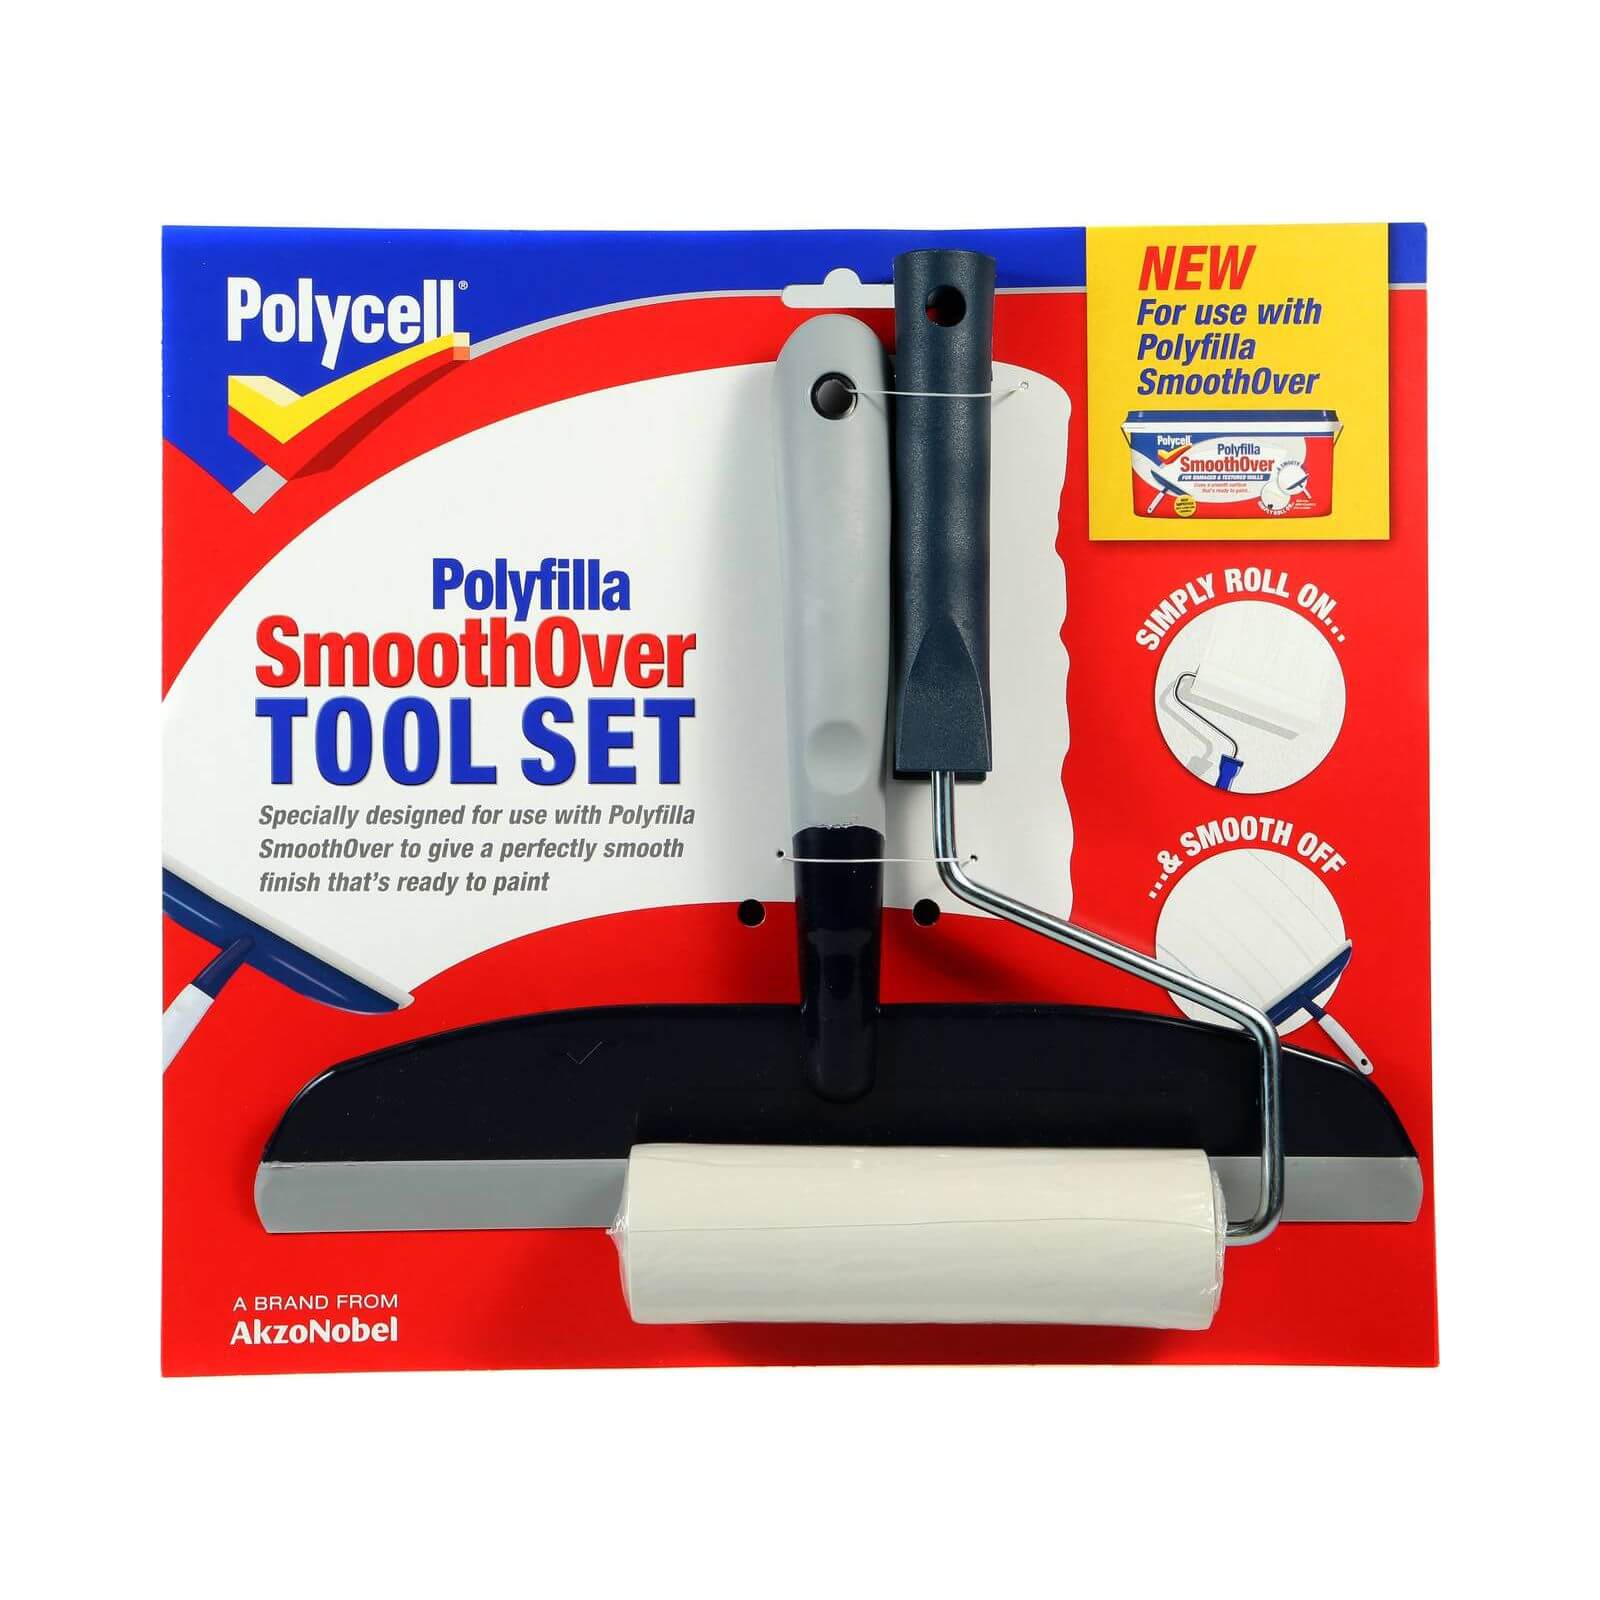 Photo of Polycell Polyfilla Smoothover Tool Set